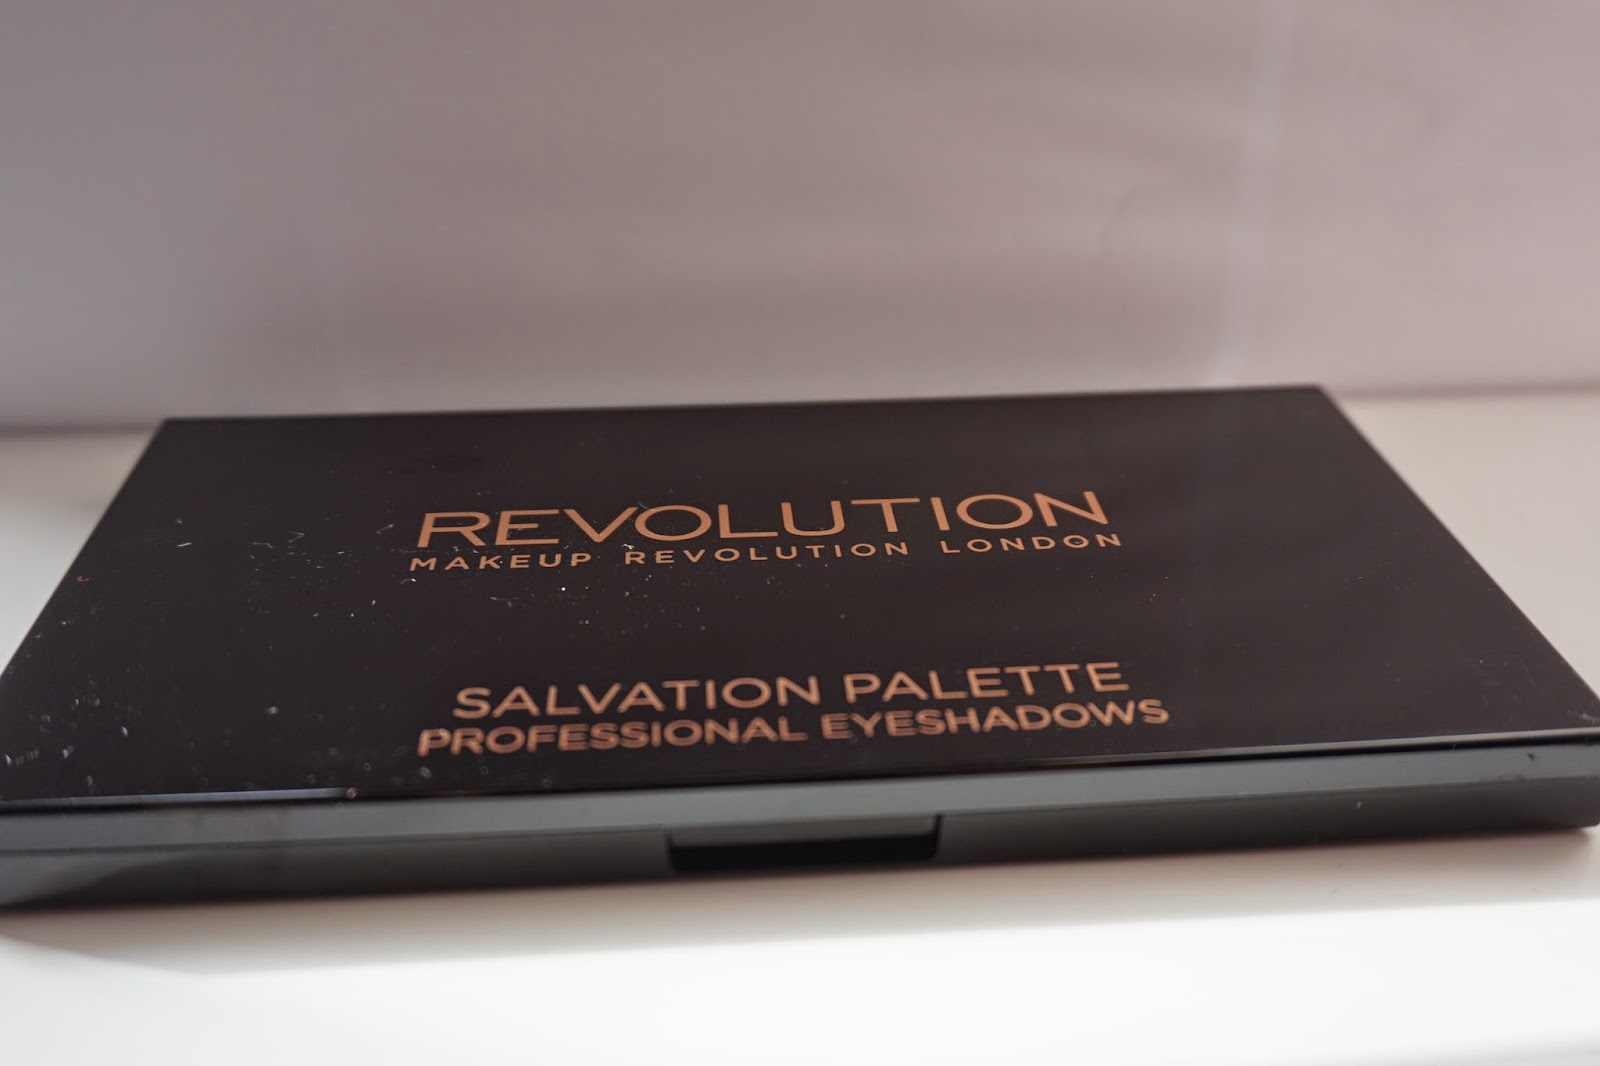 Makeup Revolution Girls on Film- Dusty Foxes Beauty Blog